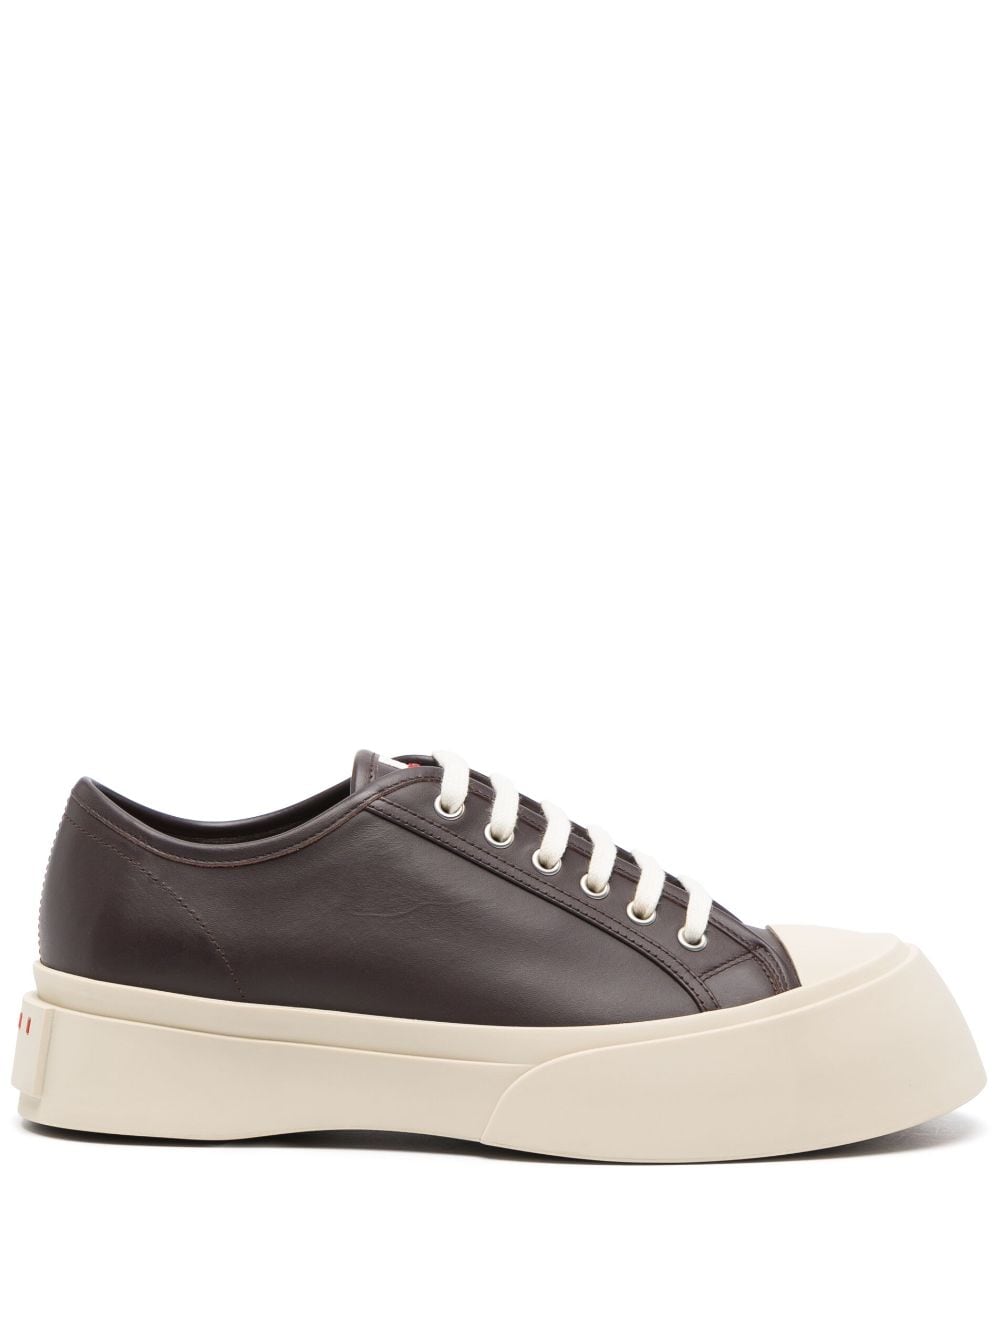 Marni Lace-up Leather Sneakers In Brown